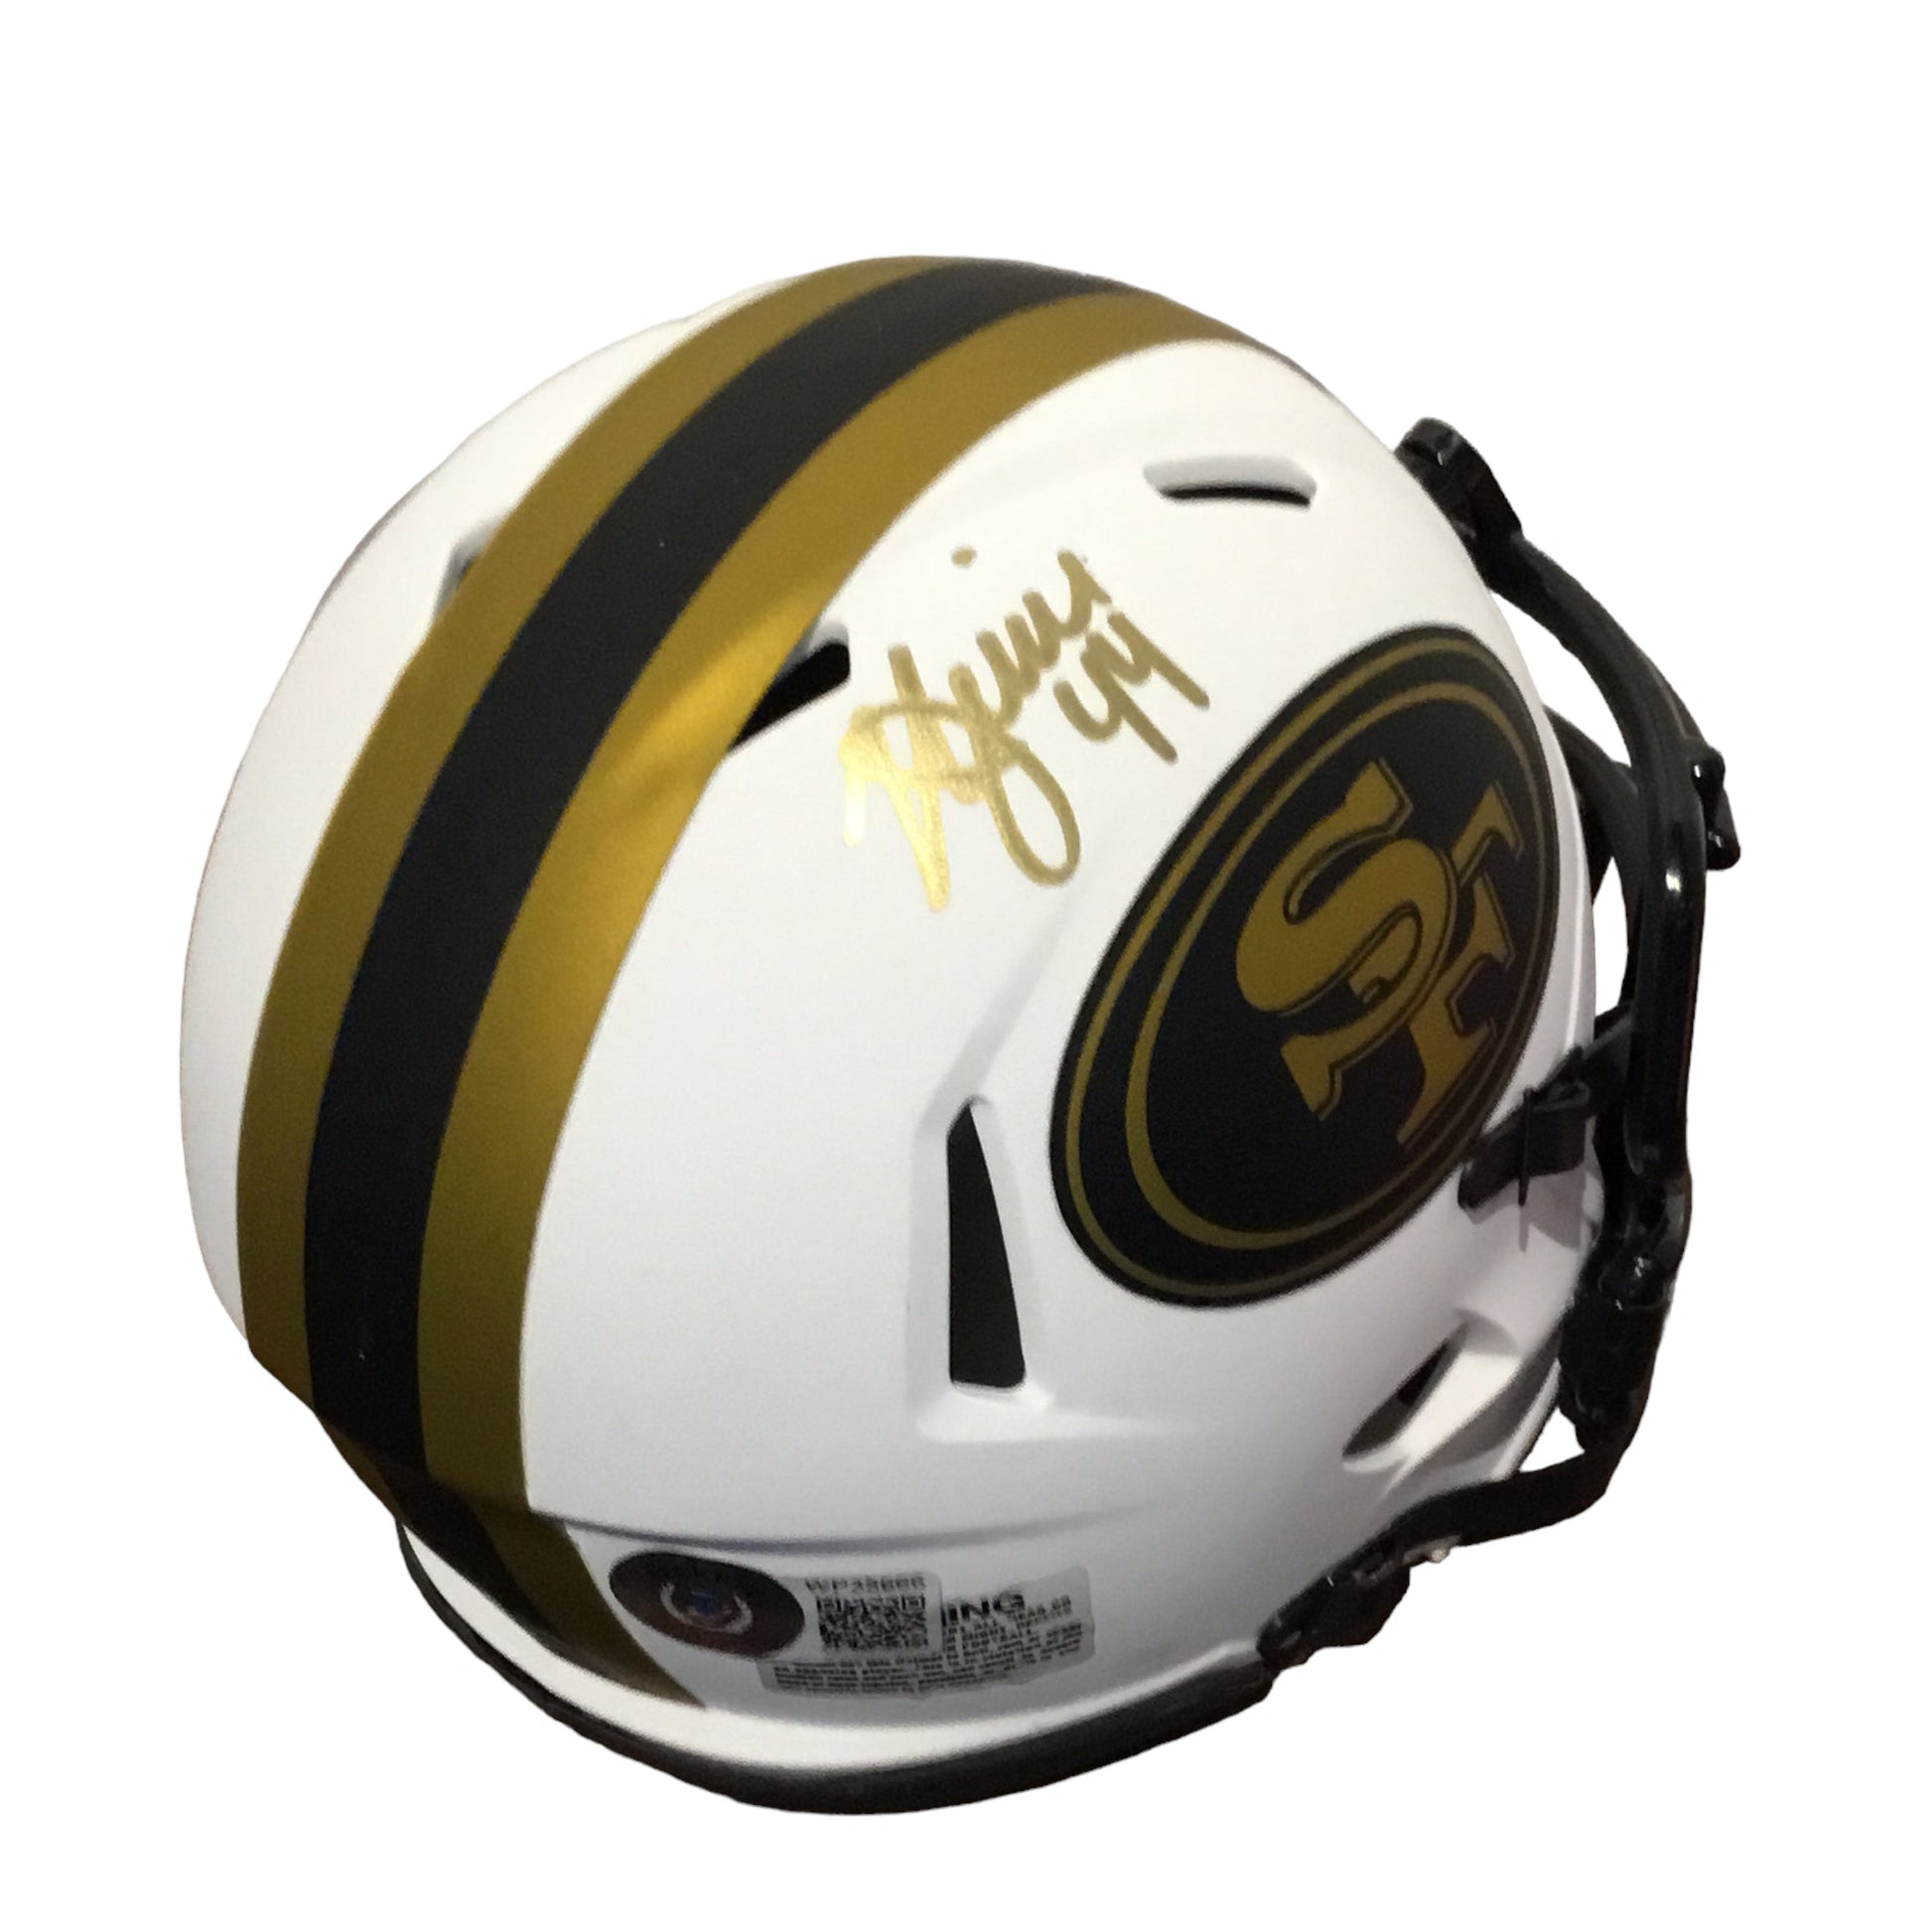 Kyle JUSZCYK Autographed San Francisco 49ers White Mini Helmet with Beckett Certification